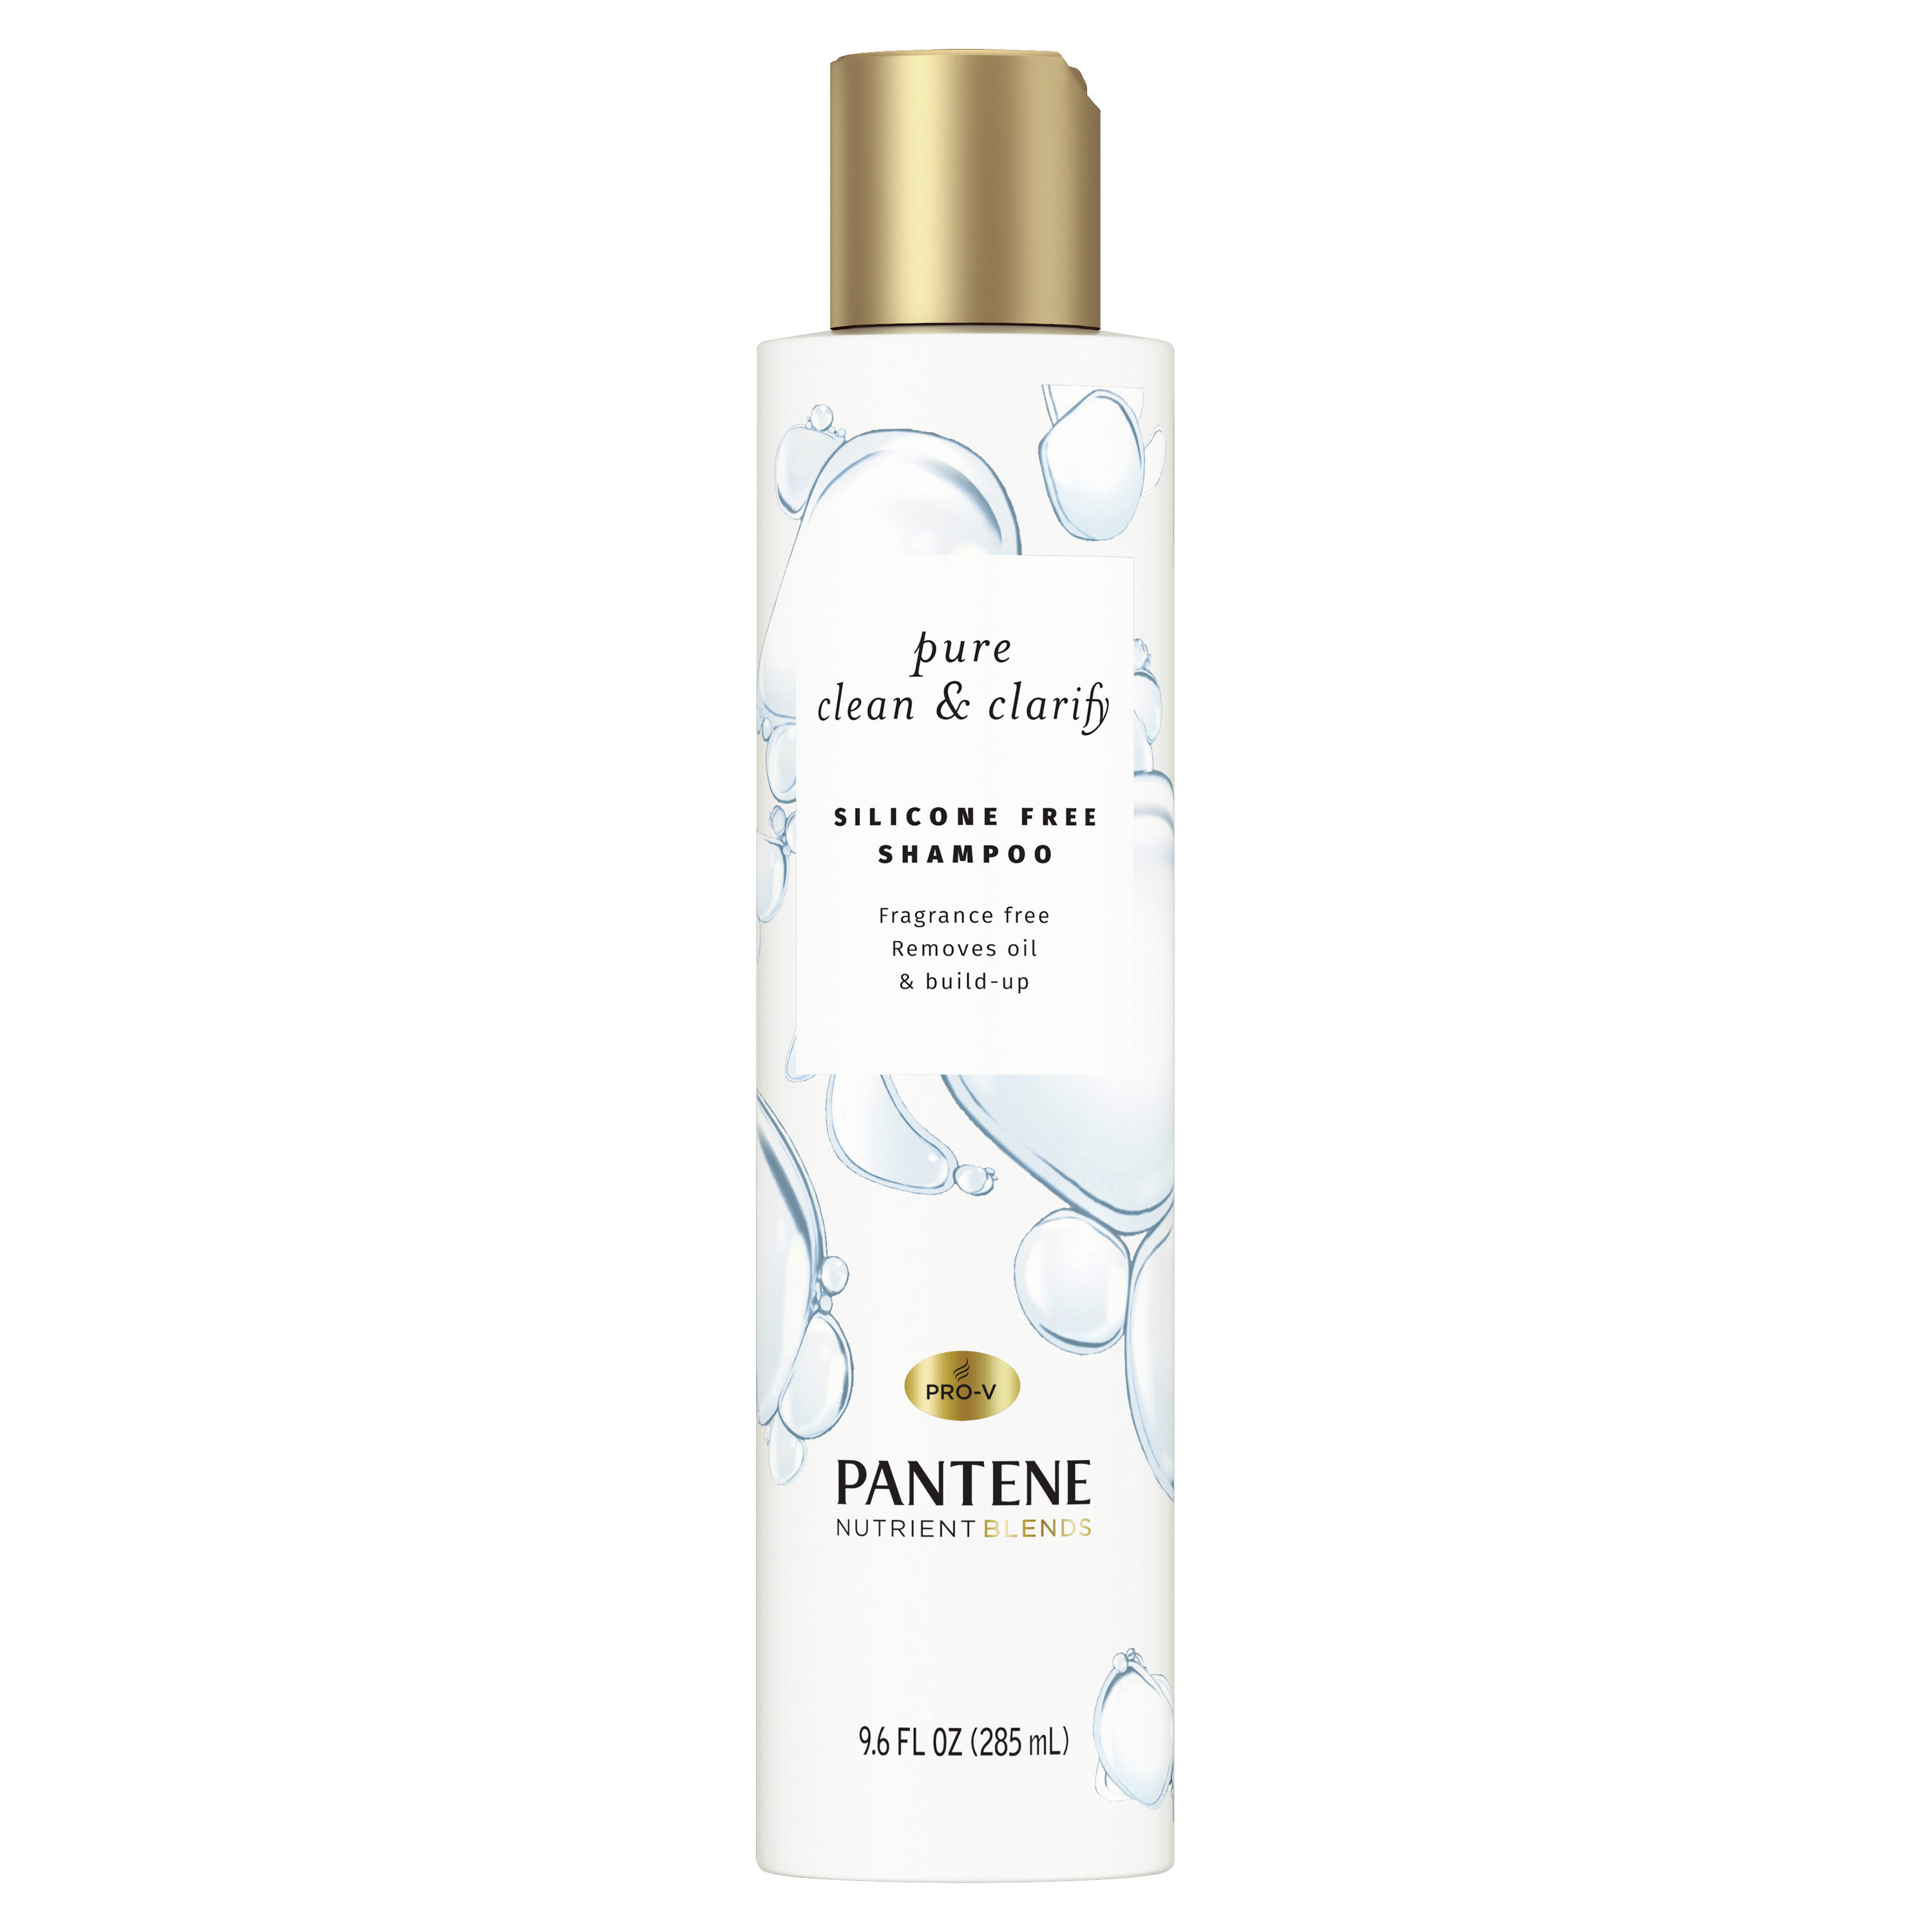 Pantene Nutrient Blends Fragrance Free Shampoo, Pure Clean, 9.6 oz - image 1 of 6